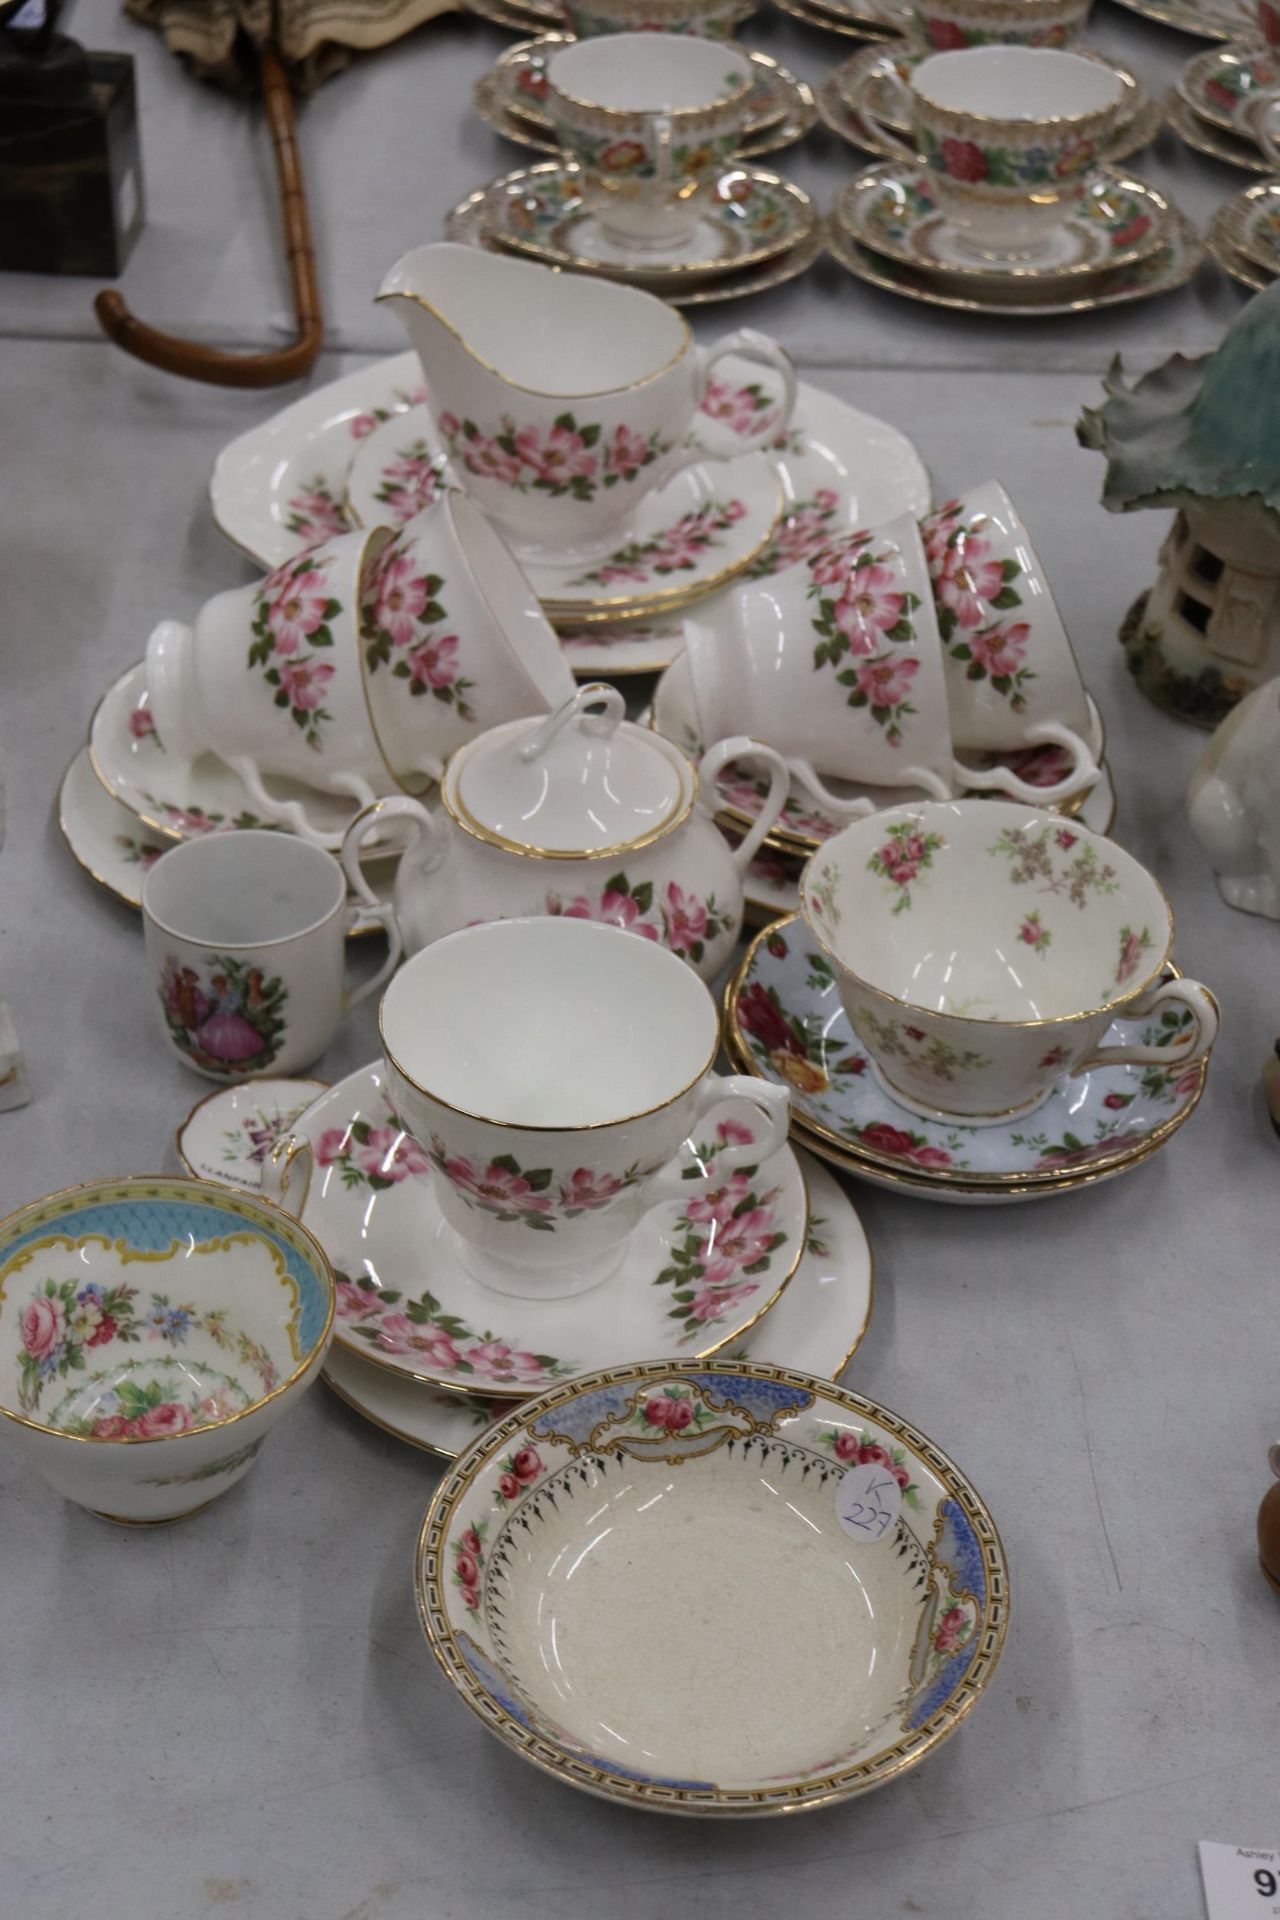 A ROYAL KENT, FLORAL, CHINA TEASET TO INCLUDE A CAKE PLATE, CREAM JUG, SUGAR BOWL, CUPS, SAUCERS AND